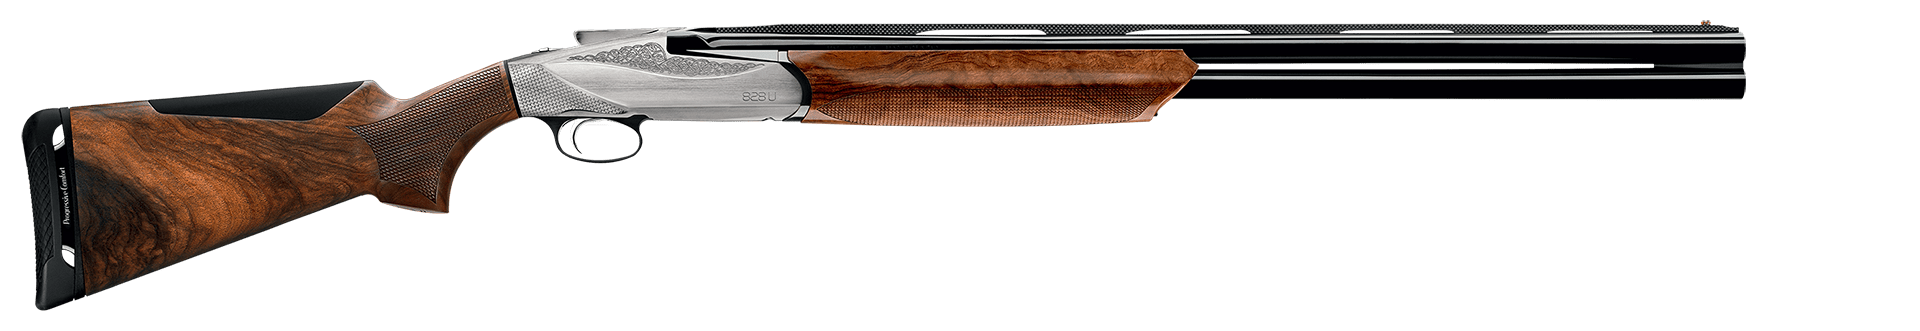 benelli-828-u-silver-compact.png